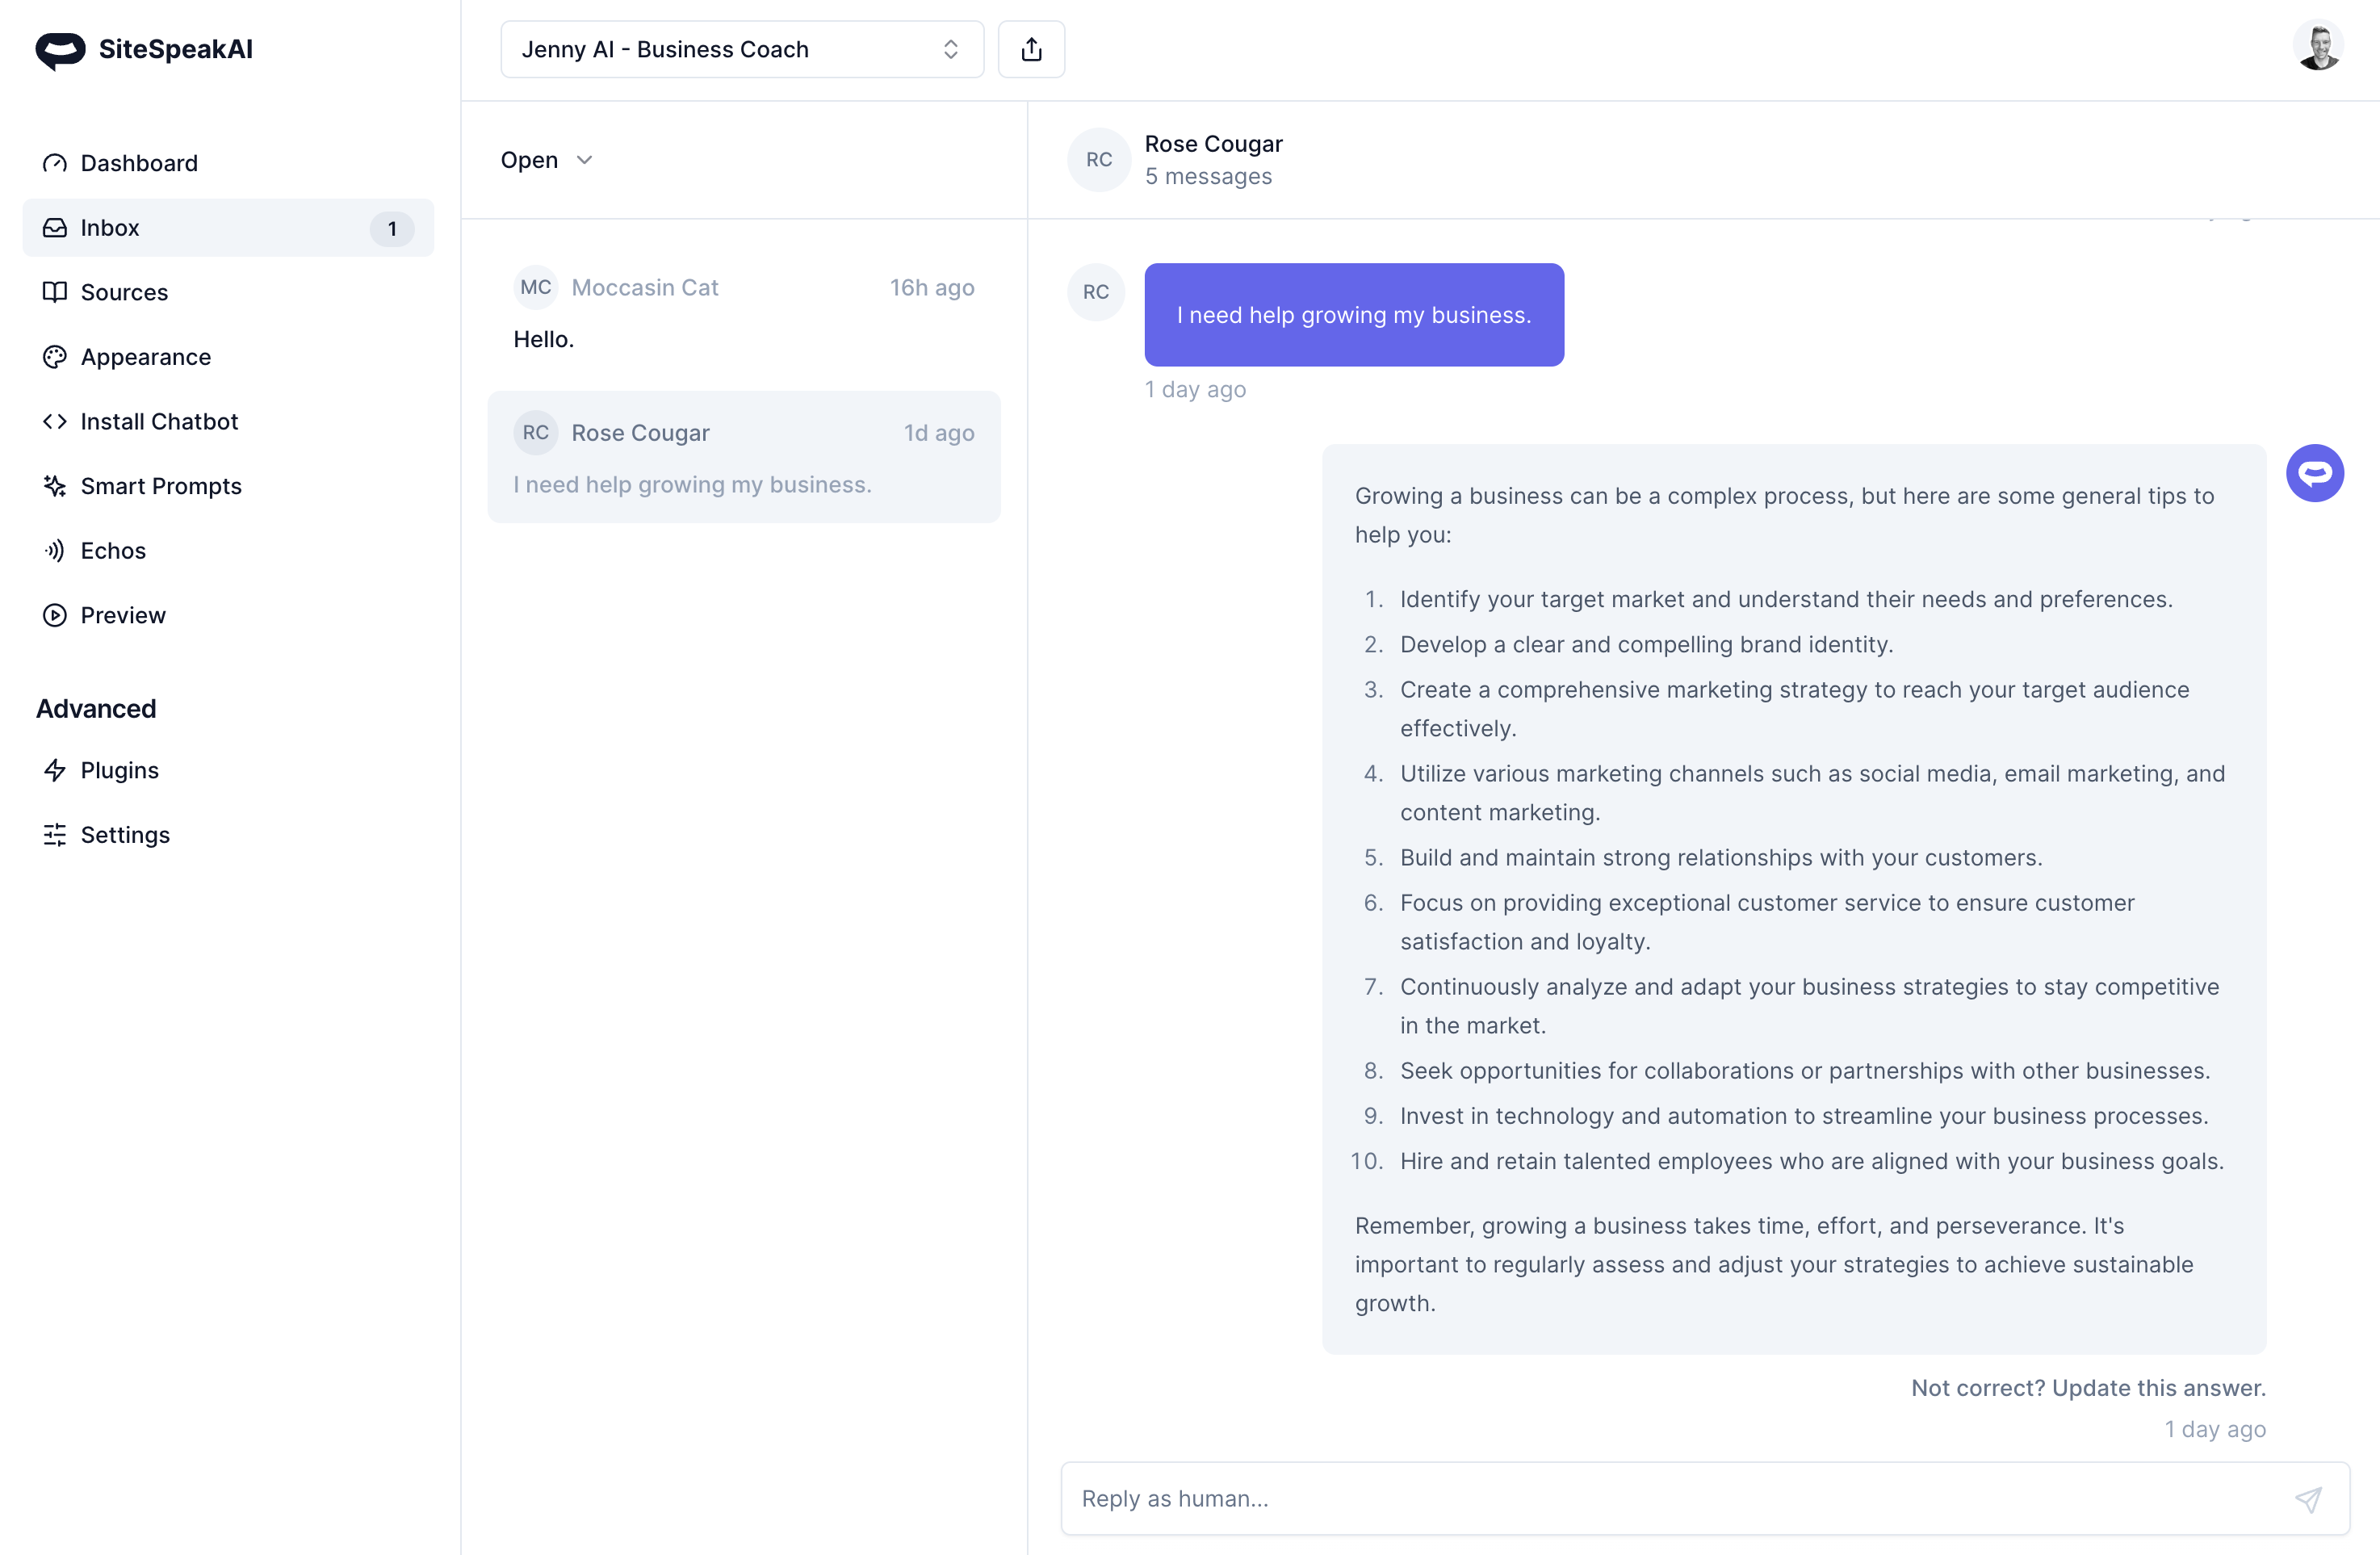 Monitor your AI inbox and conversations